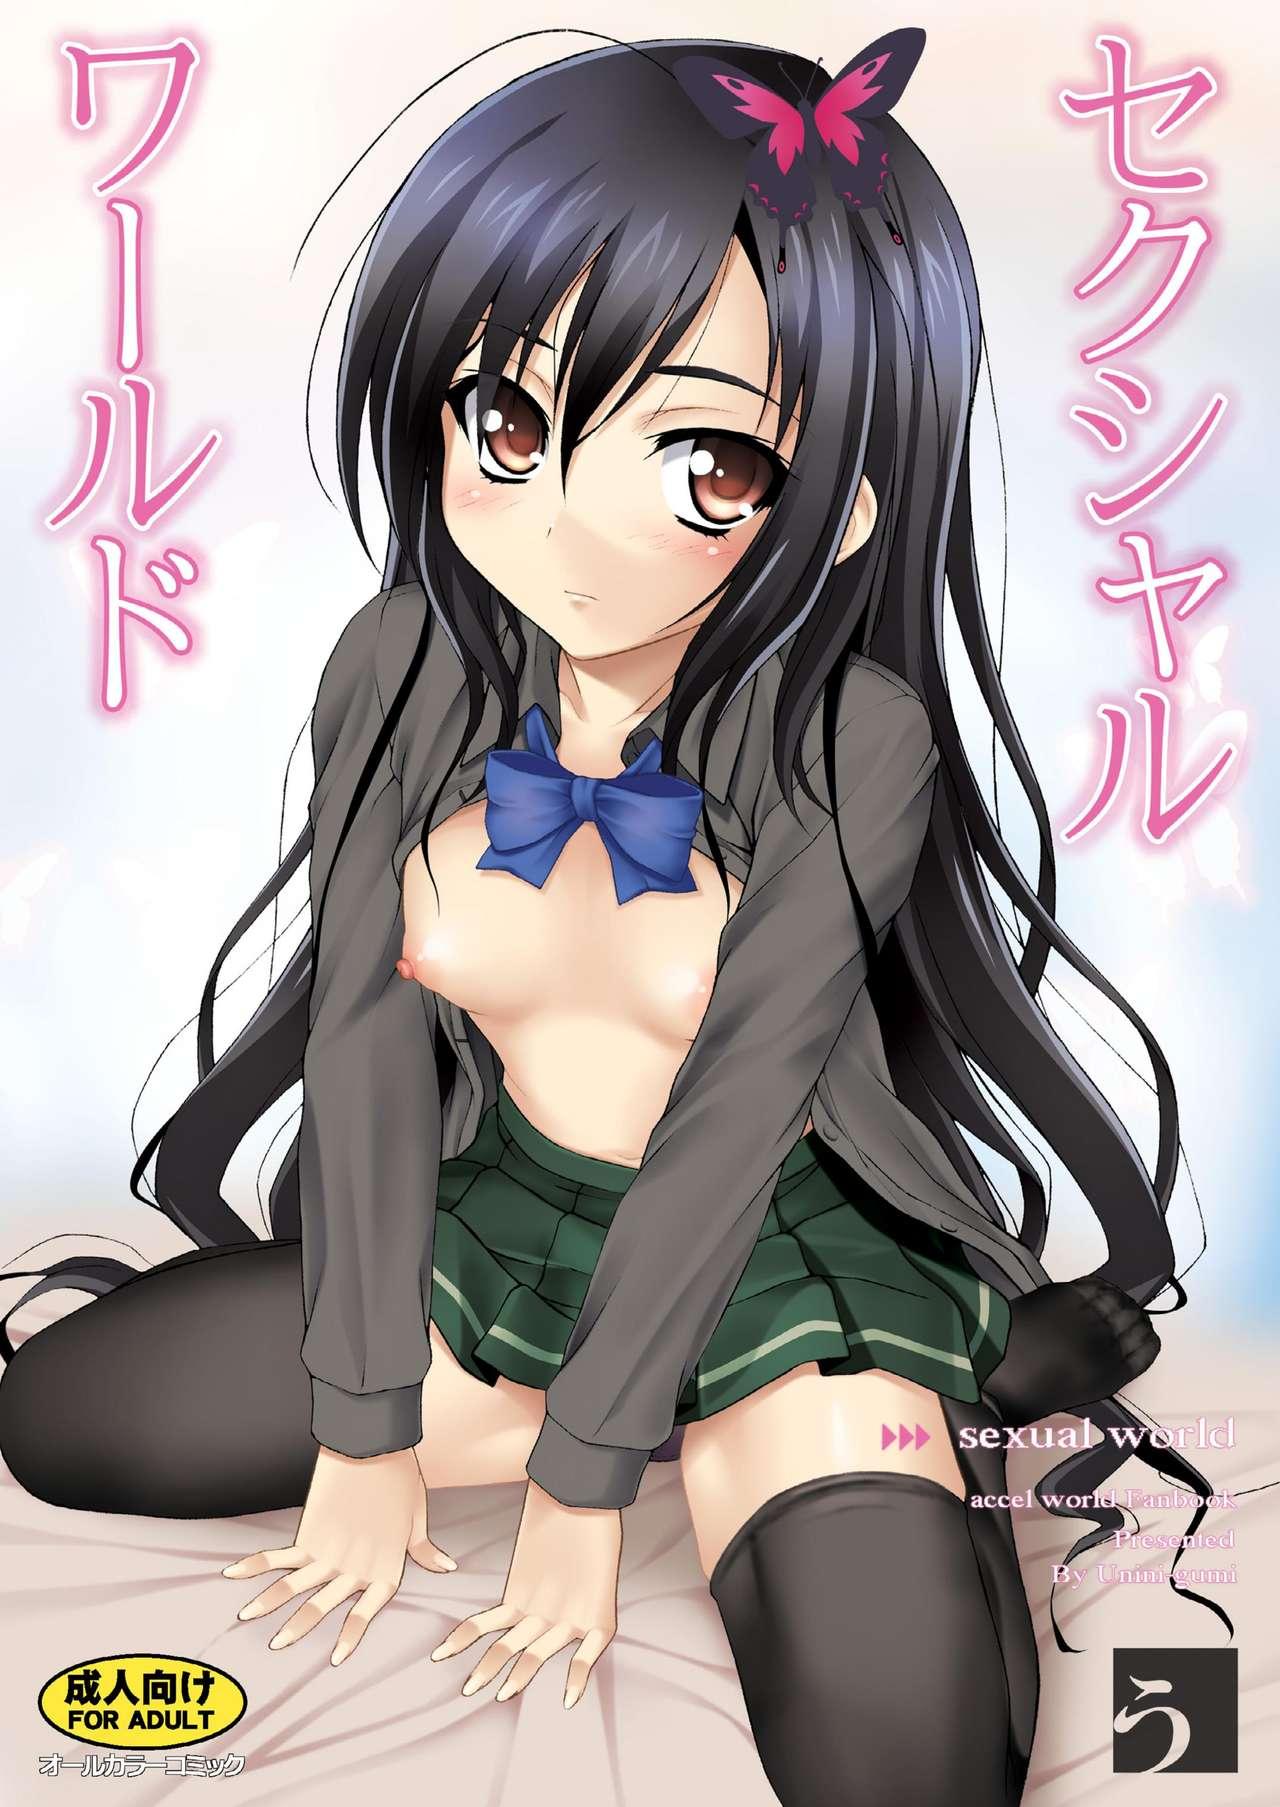 Japanese Sexual world - Accel world Euro - Page 1